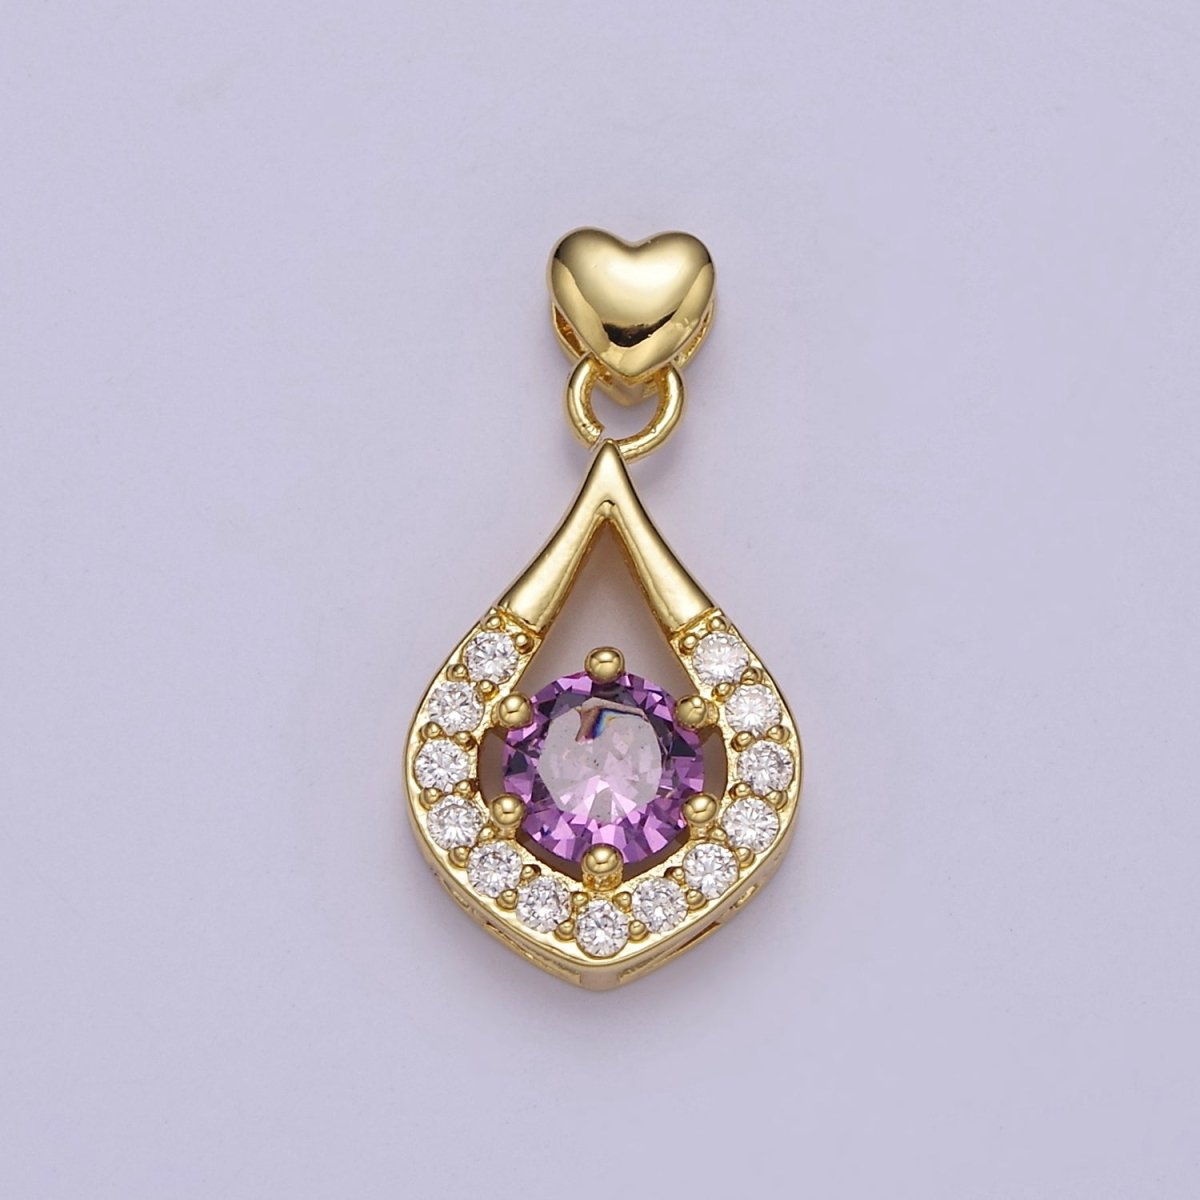 Multicolor Teardrop Cubic Zirconia CZ Stone Pendant Charm with Heart Golden Bail For Jewelry Necklace Making J-582~J-588 - DLUXCA